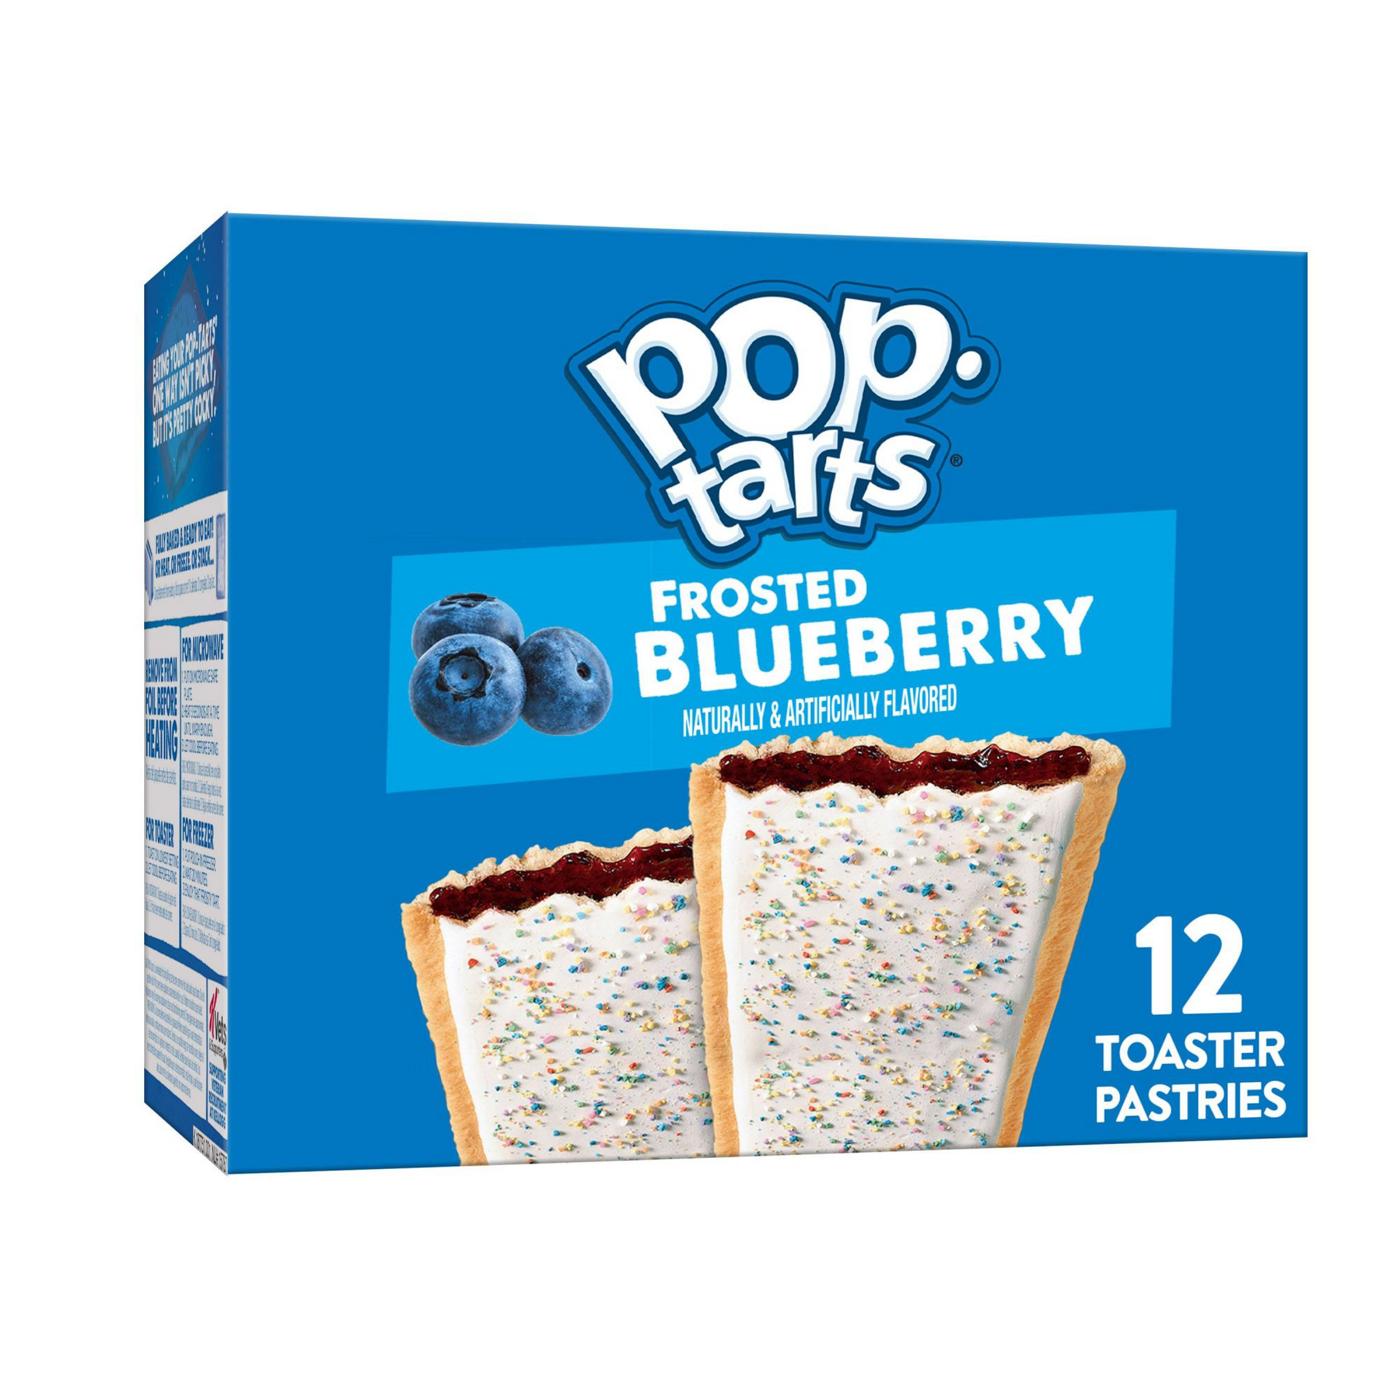 Pop-Tarts Frosted Blueberry Toaster Pastries; image 1 of 3